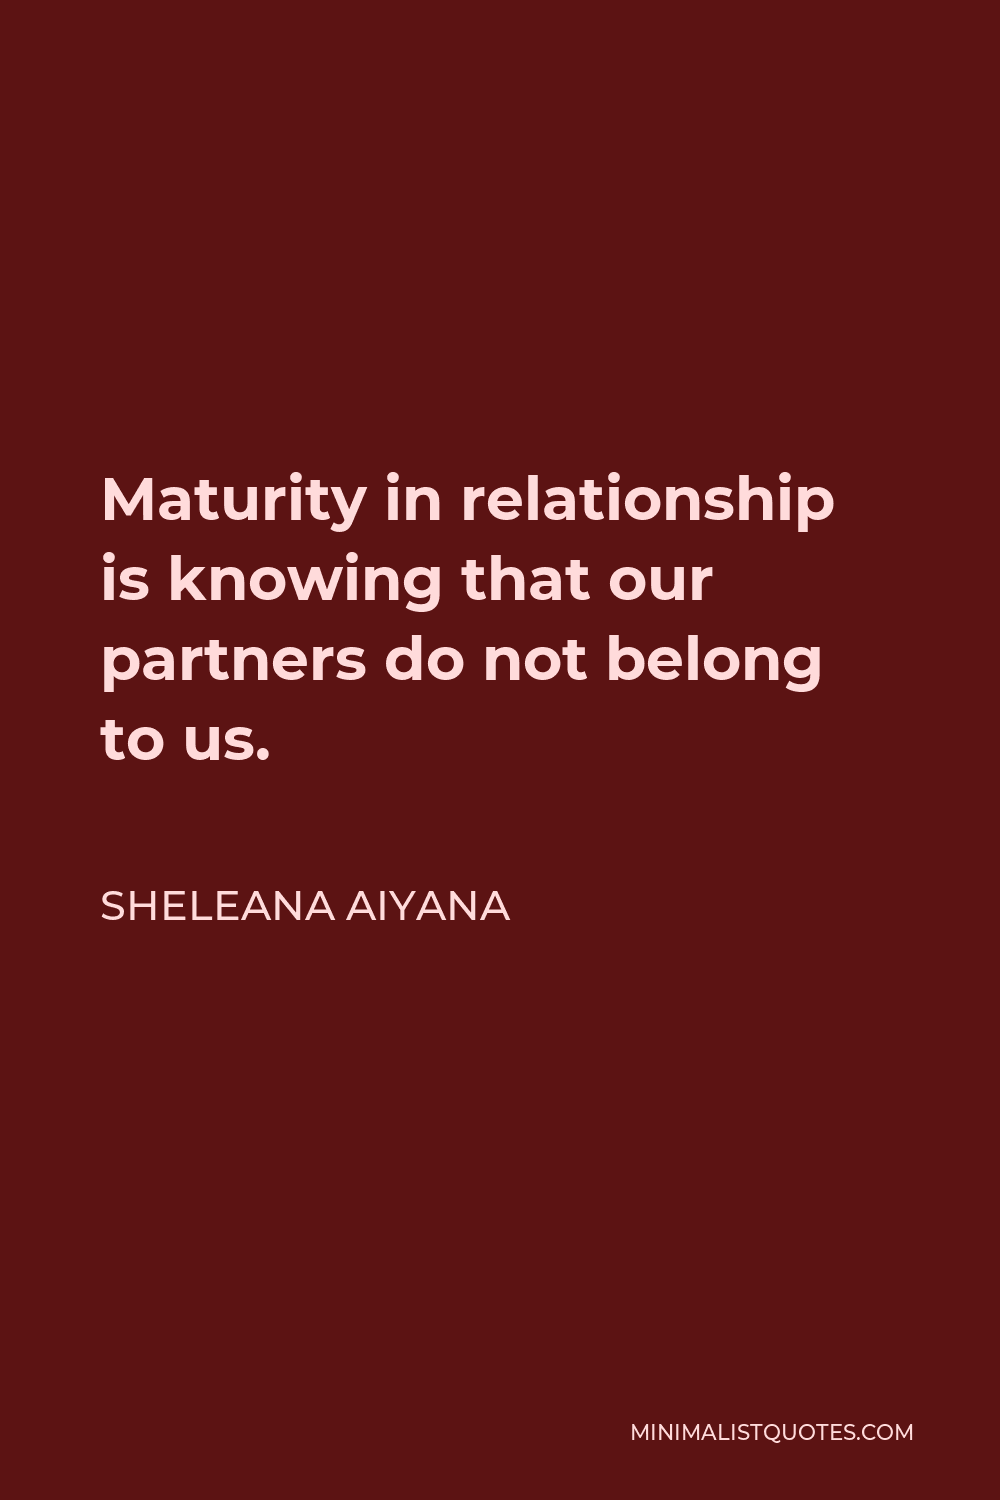 Sheleana Aiyana Quote - Maturity in relationship is knowing that our partners do not belong to us.